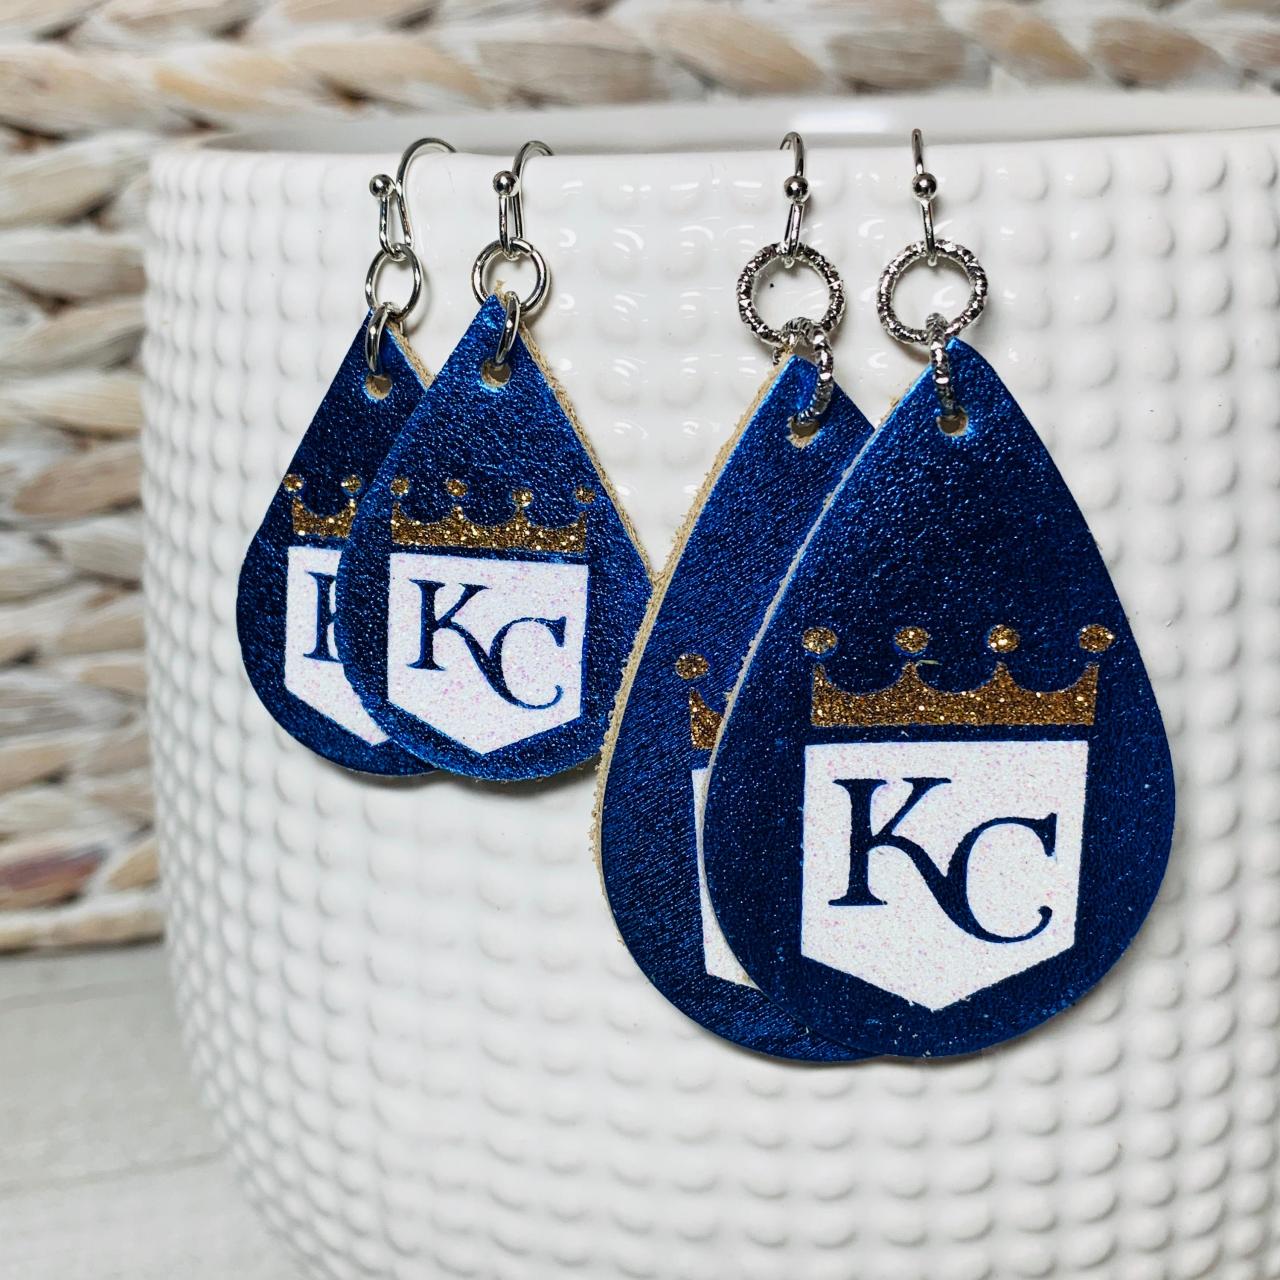 Kc Royals Leather Earrings | Kc Leather Earrings | Teardrop Earrings | Baseball Leather Earrings | Genuine Leather